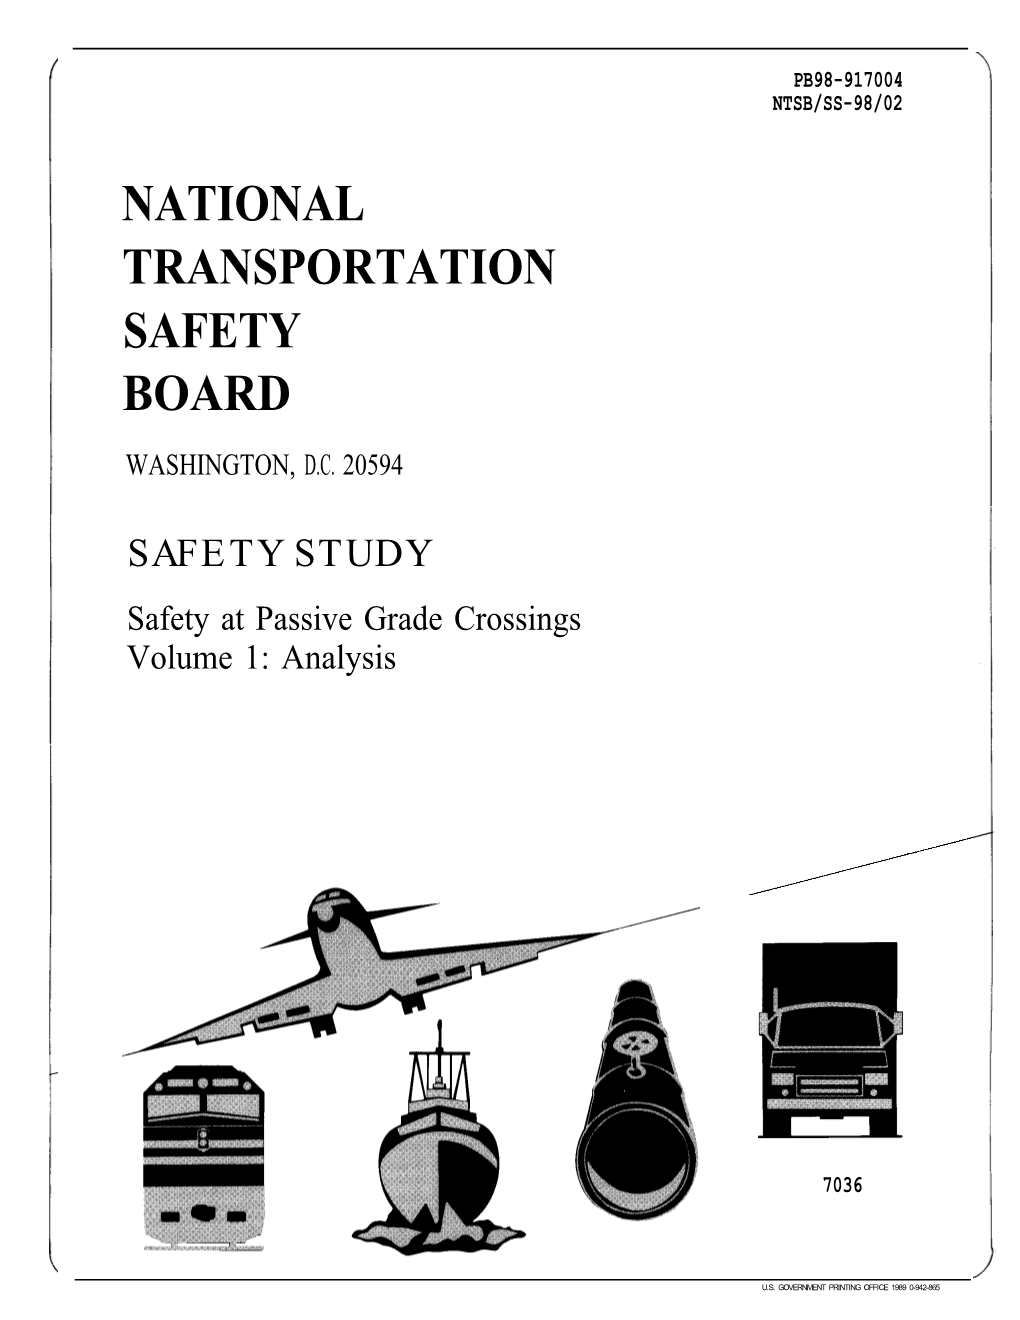 Safety at Passive Grade Crossings; Volume 1: Analysis